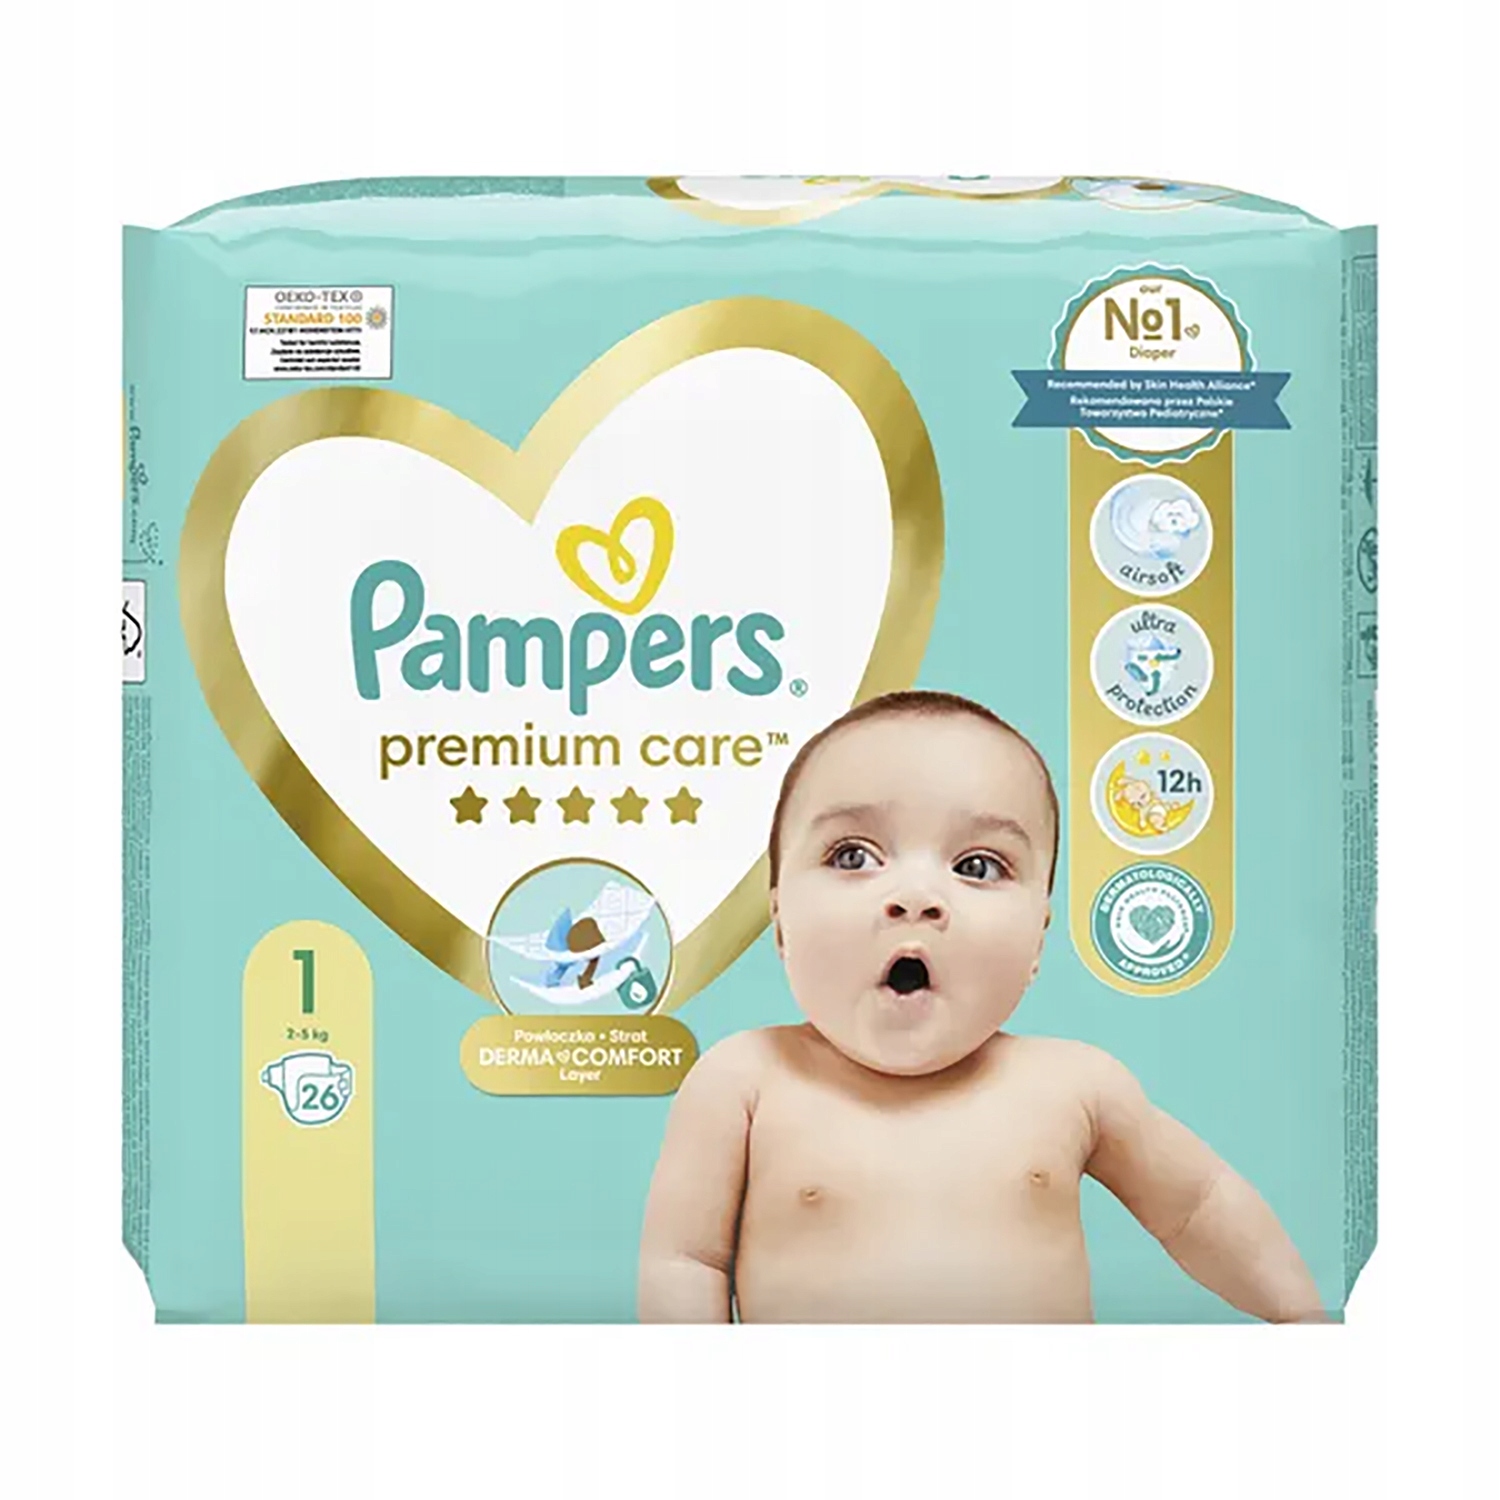 pampers pure 3 rossmann